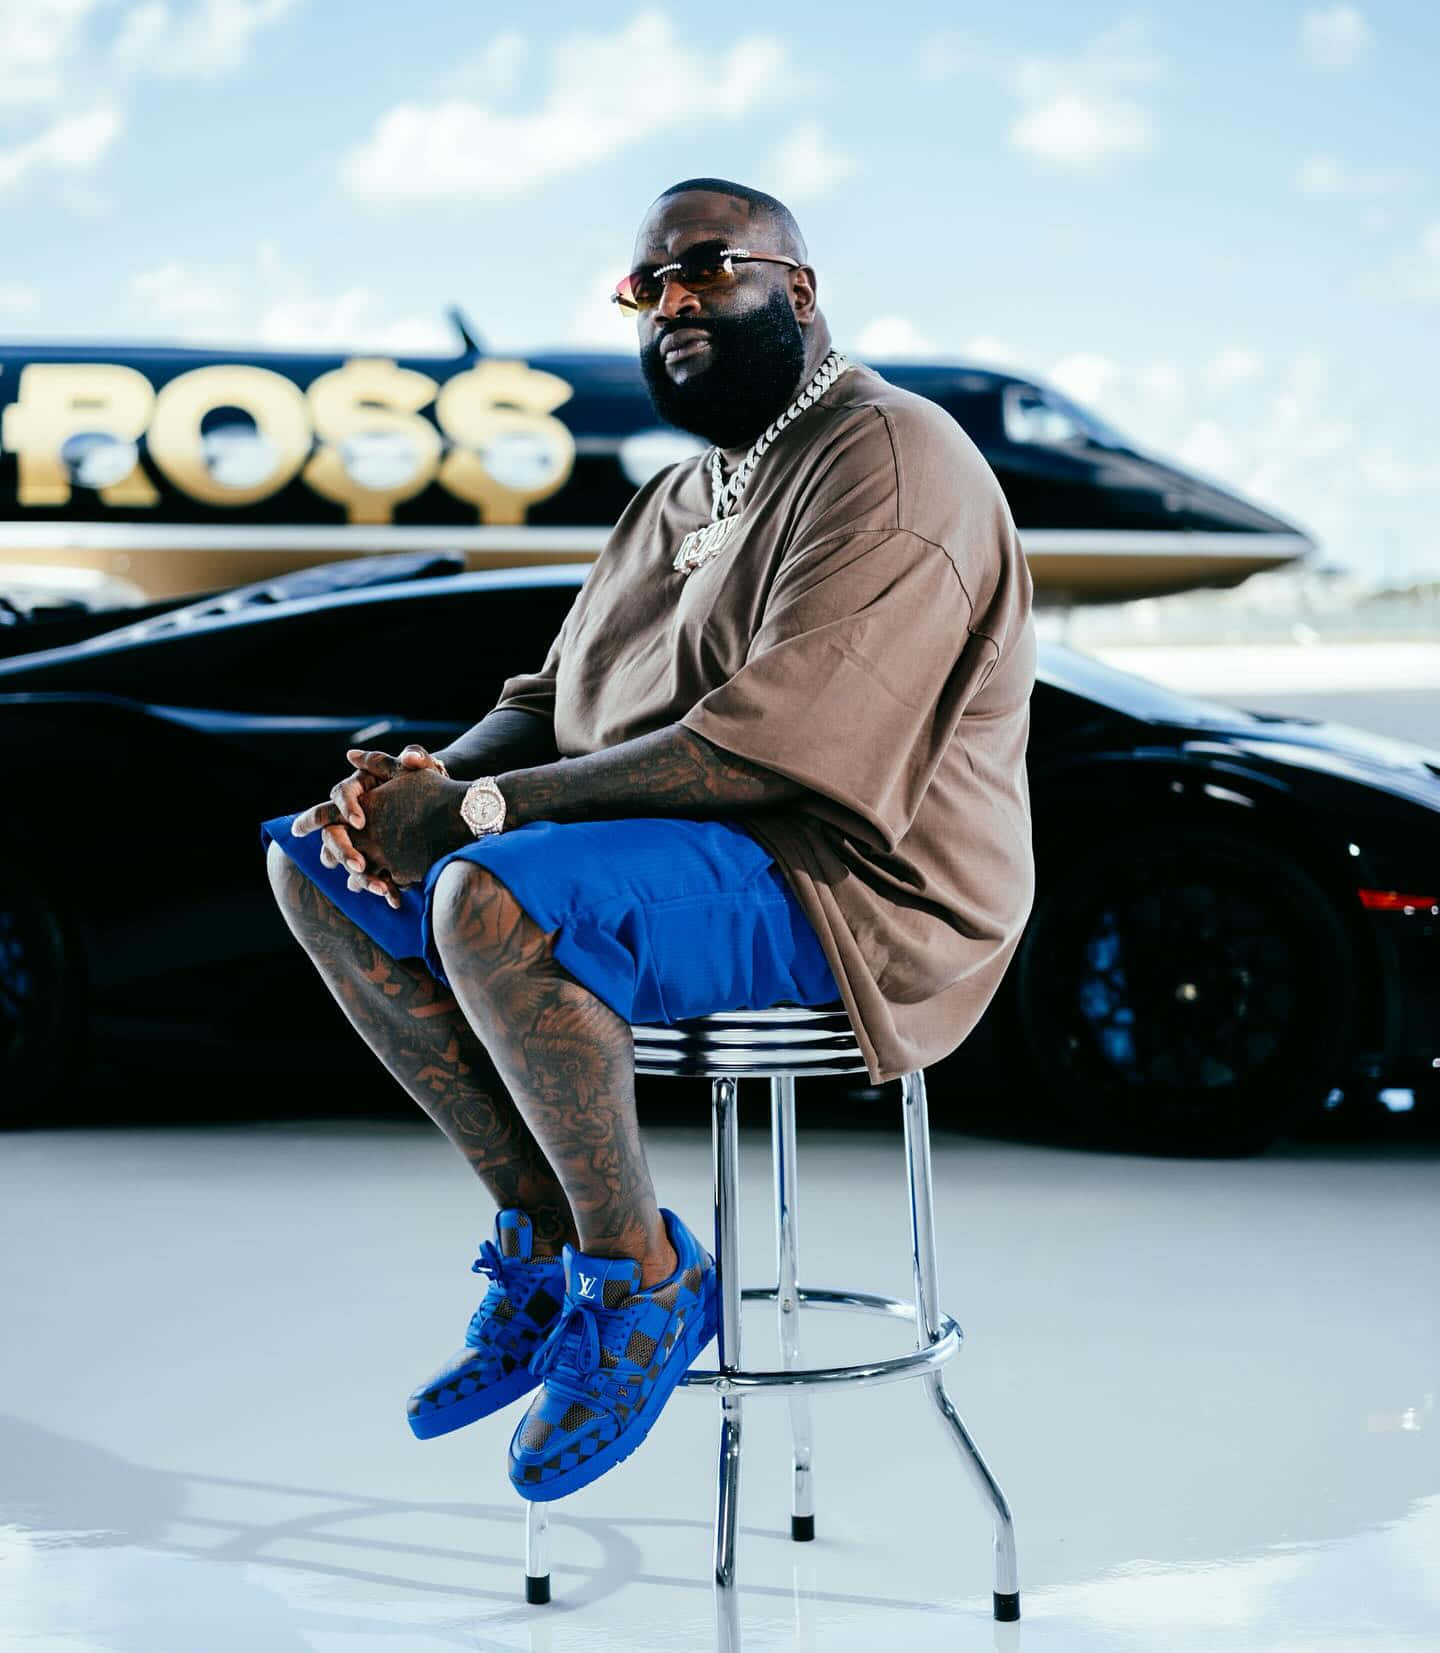 Rick Ross Stylish Pose With Cars And Jet Wallpaper